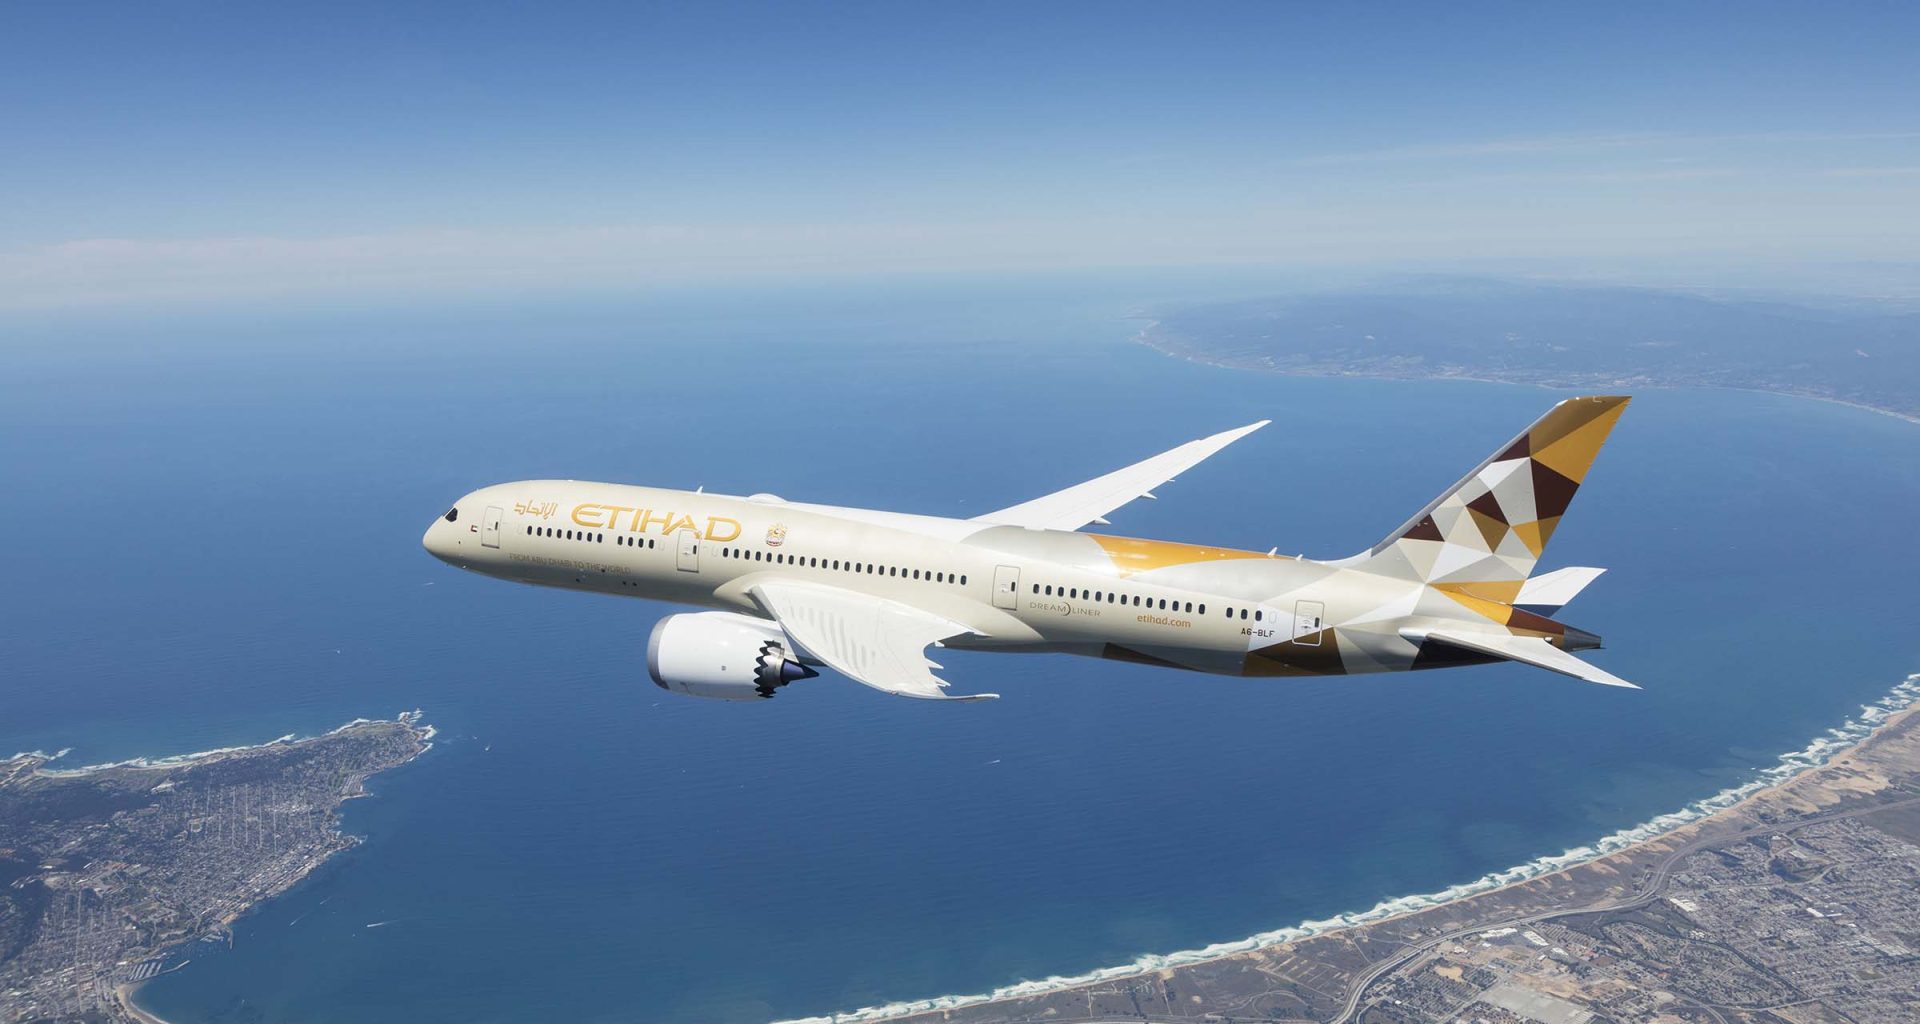 An Etihad Airways B787 flying in the air. Sea and partial land can be seen in the background.